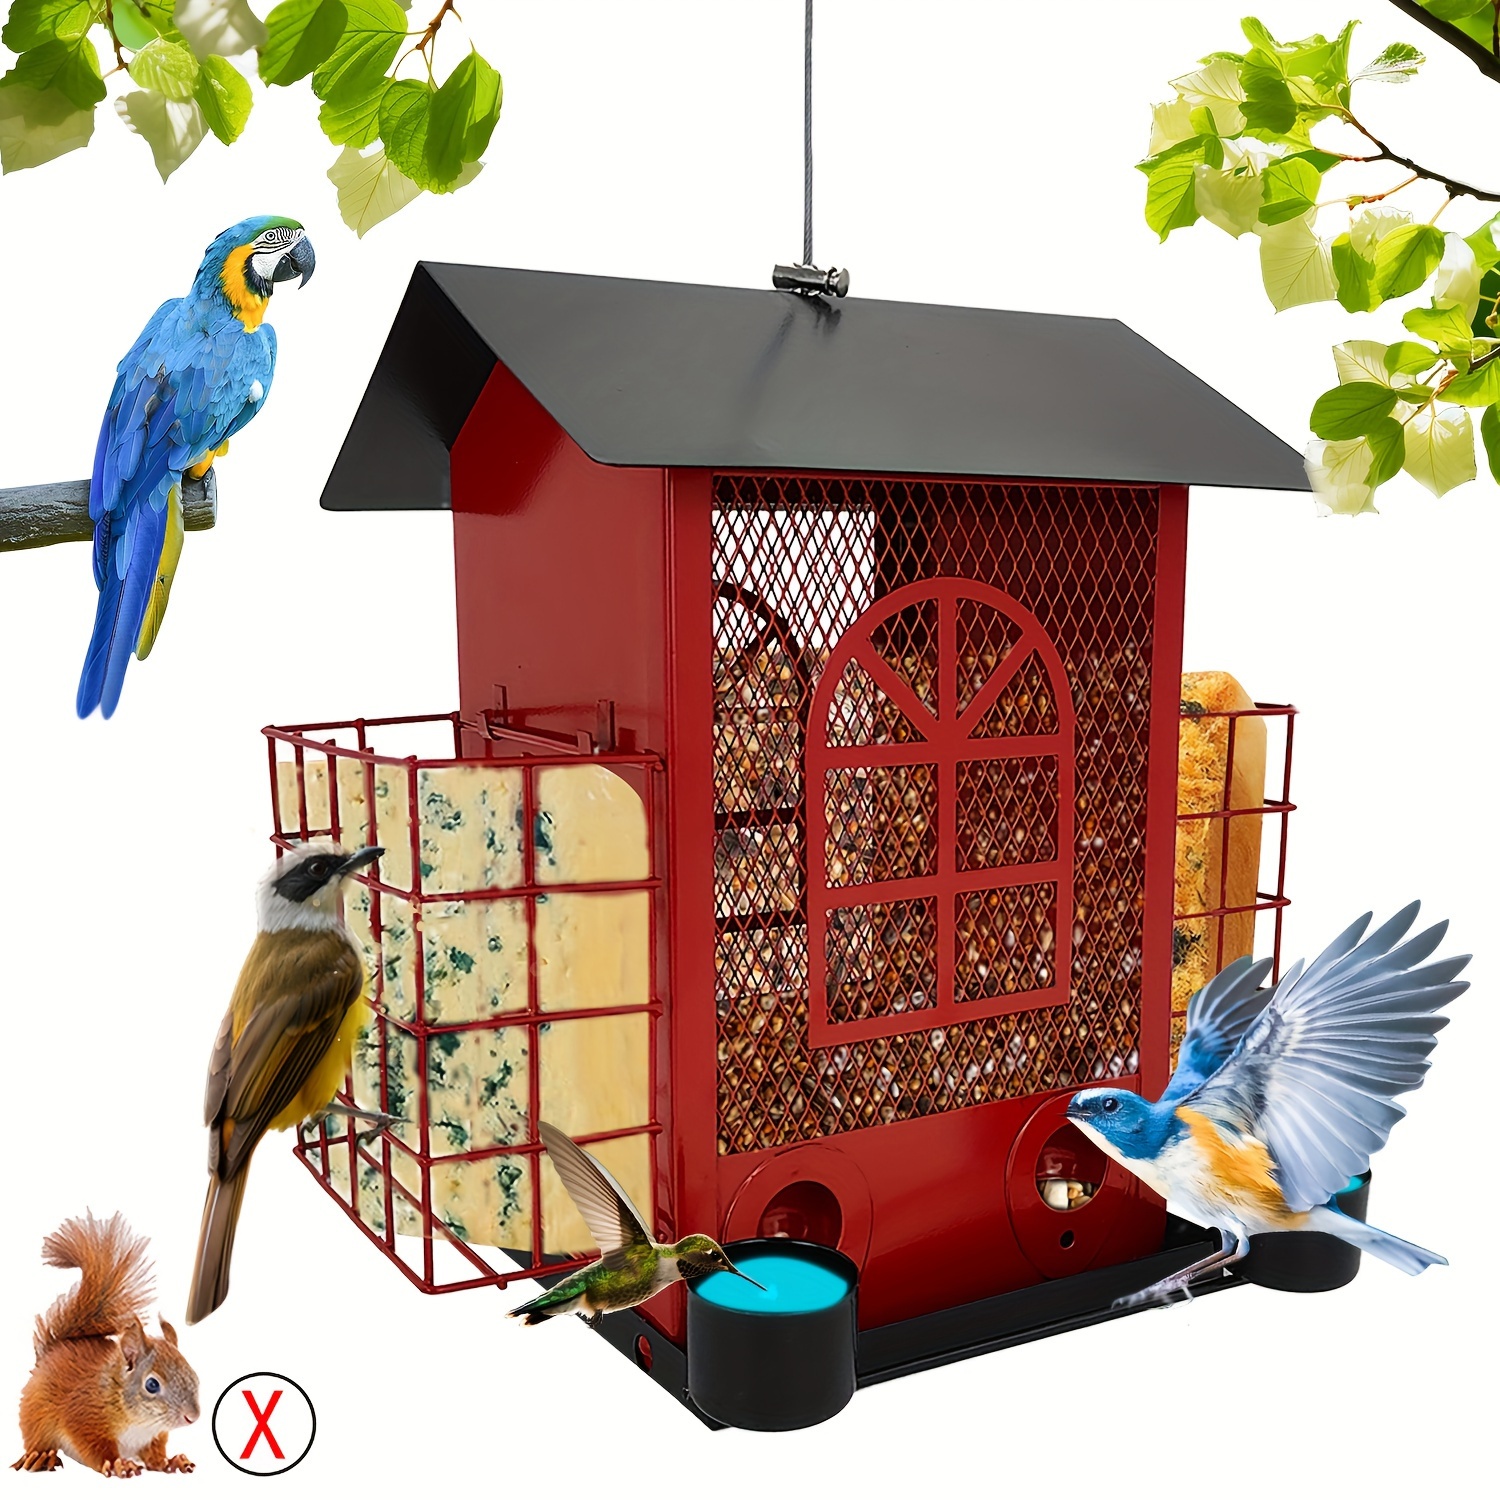 

1pc Bird Feeders For Outdoors Hanging, Metal Bird Feeder With Double Suet Cage Cake, Large Capacity, Bird Feeders Durable & Weatherproof, Easy To Clean & Refill, Great For Attracting Wild Birds